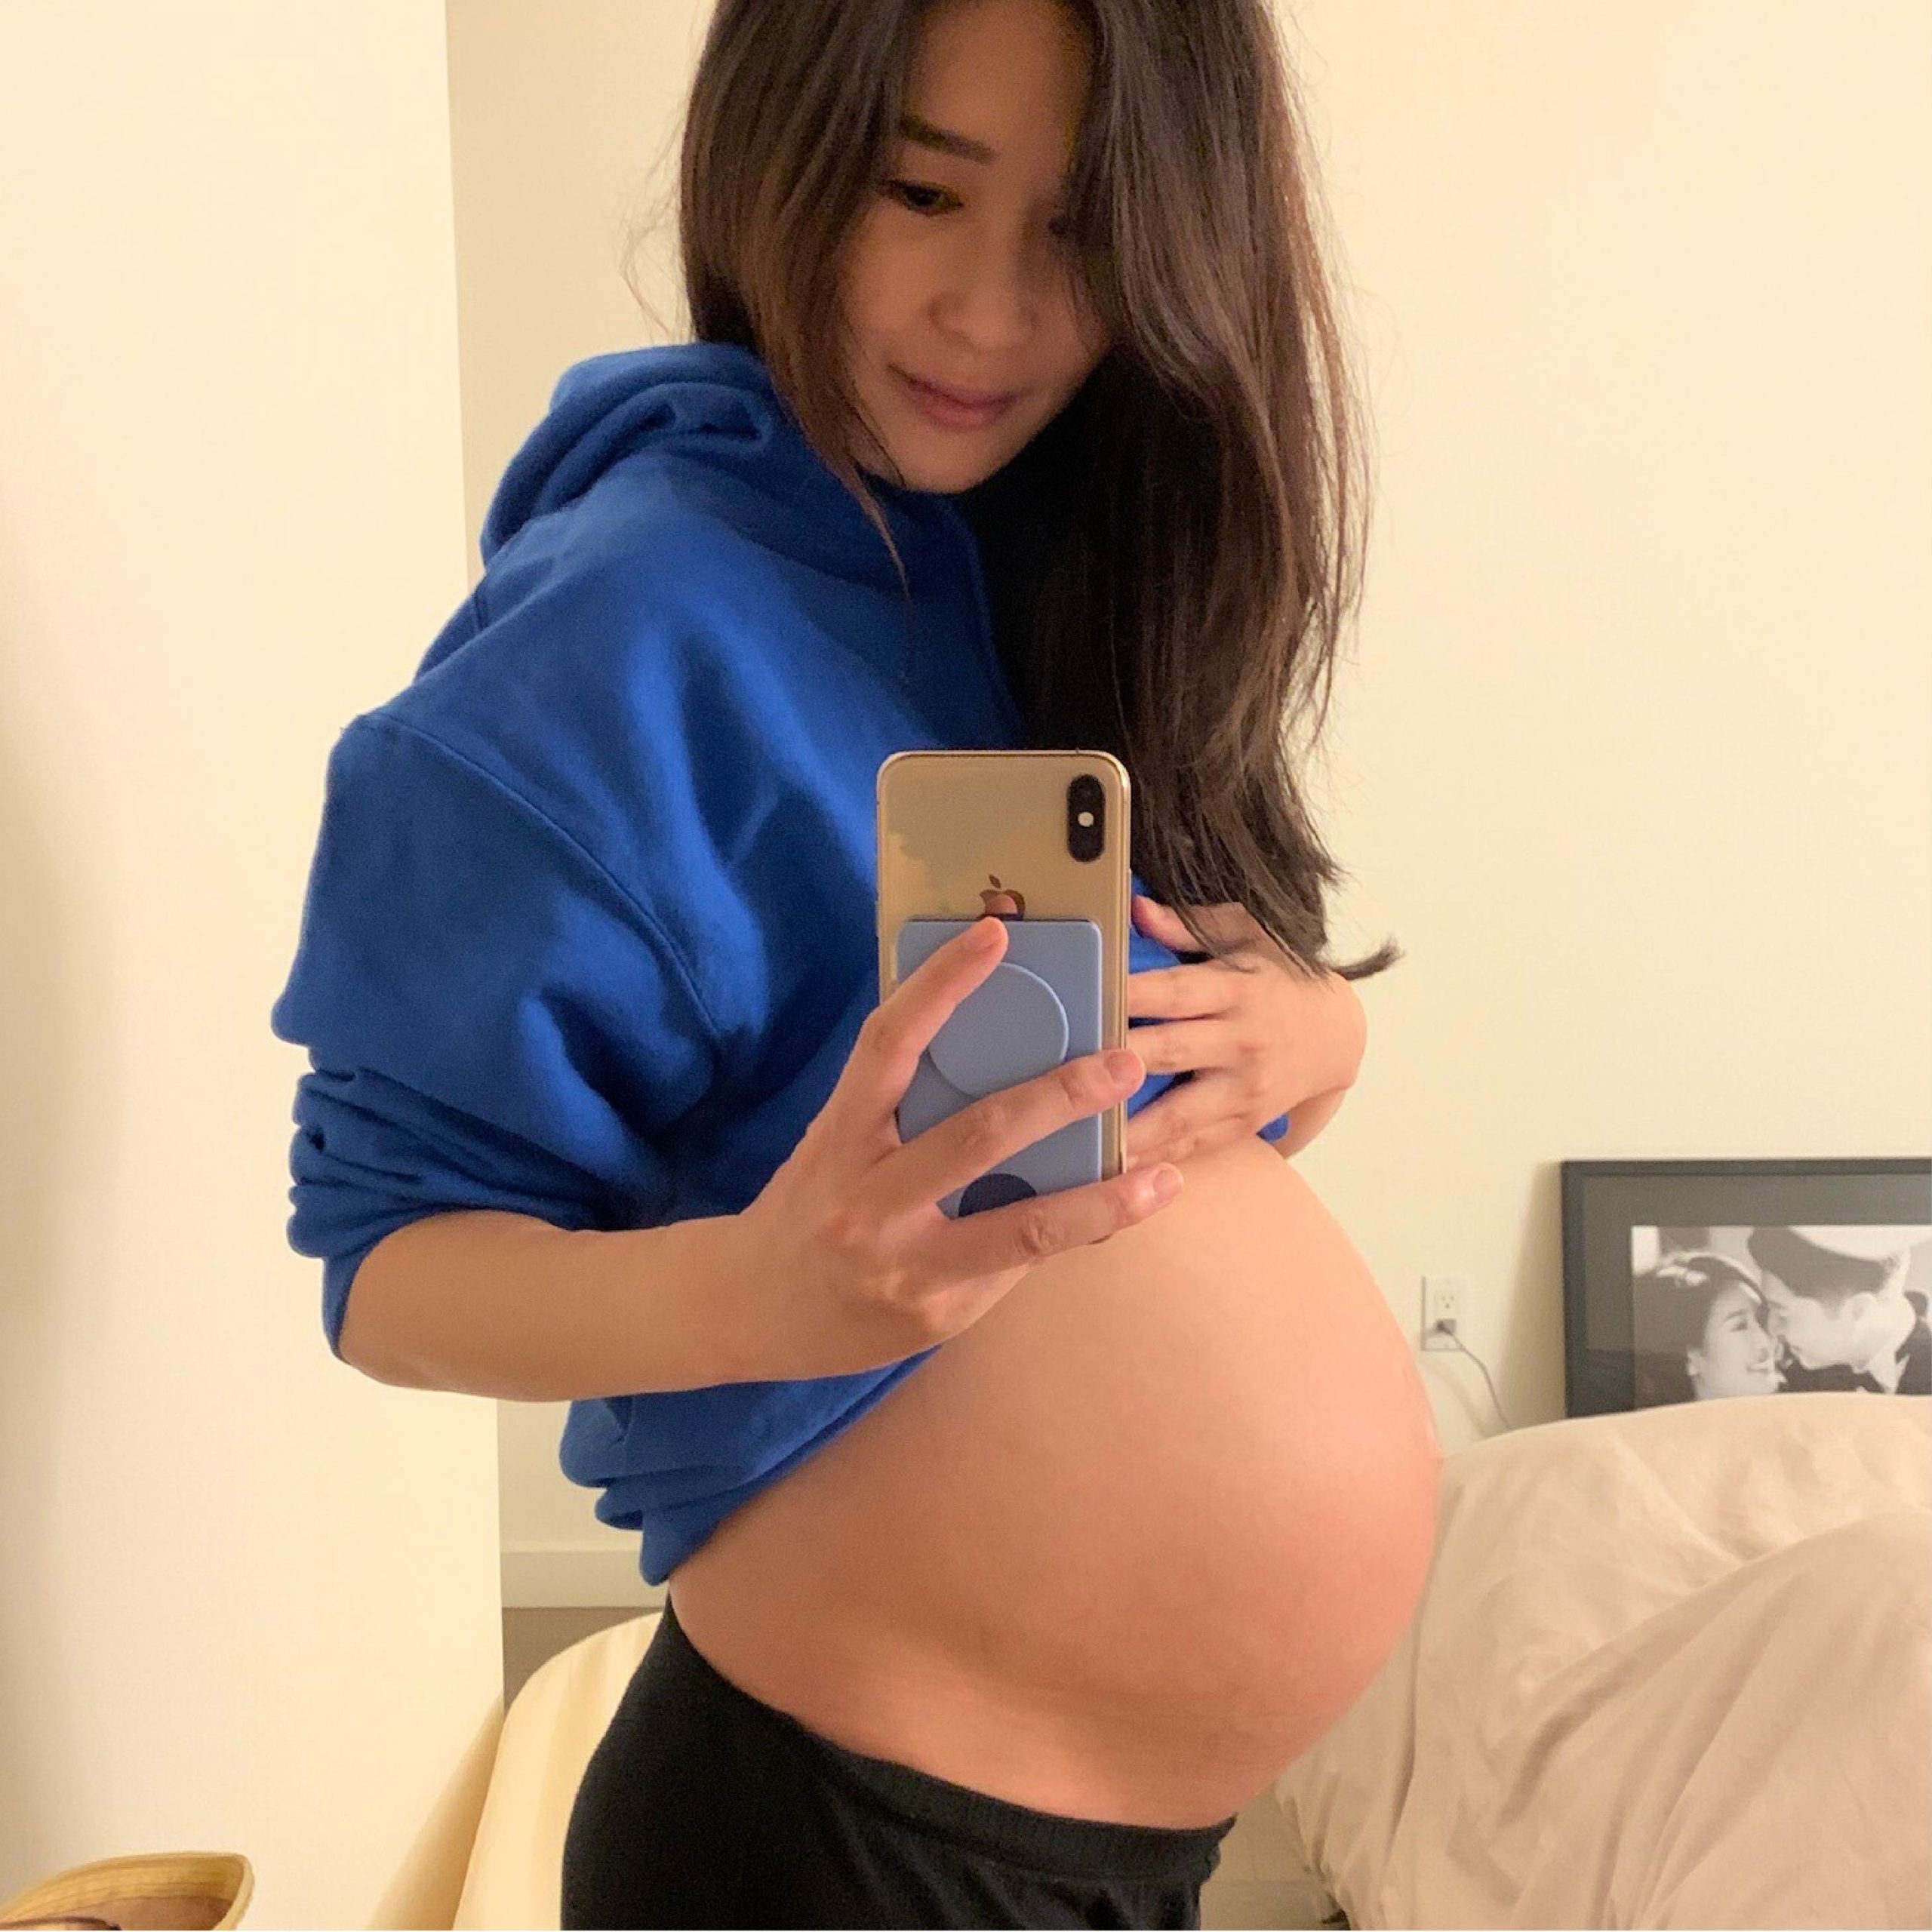 Charlotte Cho Shares Her Best Pregnancy Skin Care Tips For Glowy, Healthy Skin